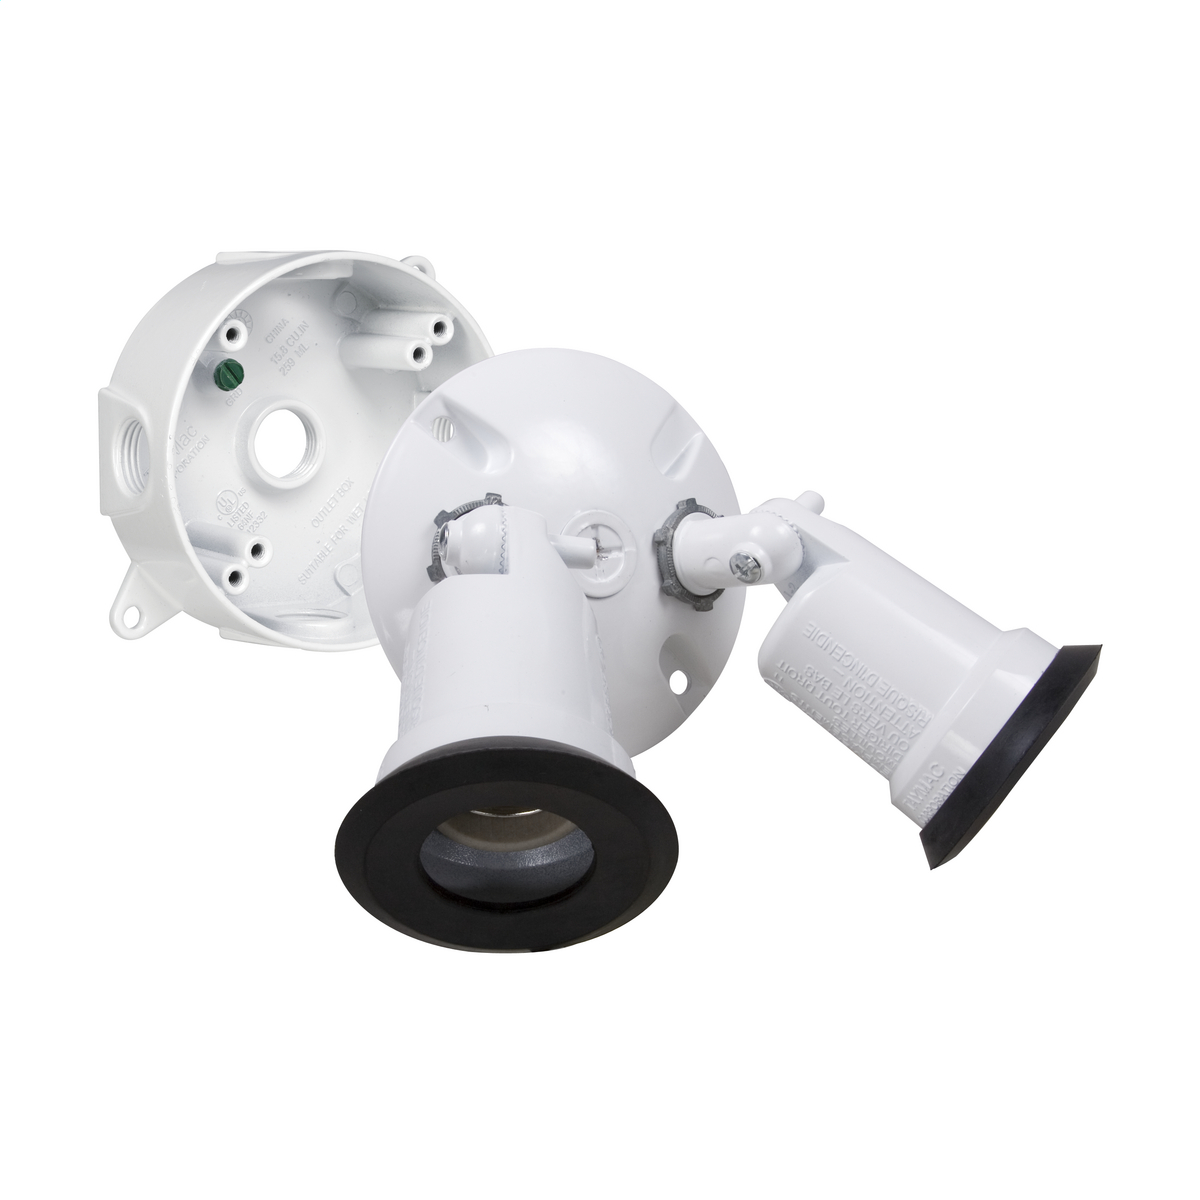 Double Lampholder Weatherproof Kit with Outlet Box - White